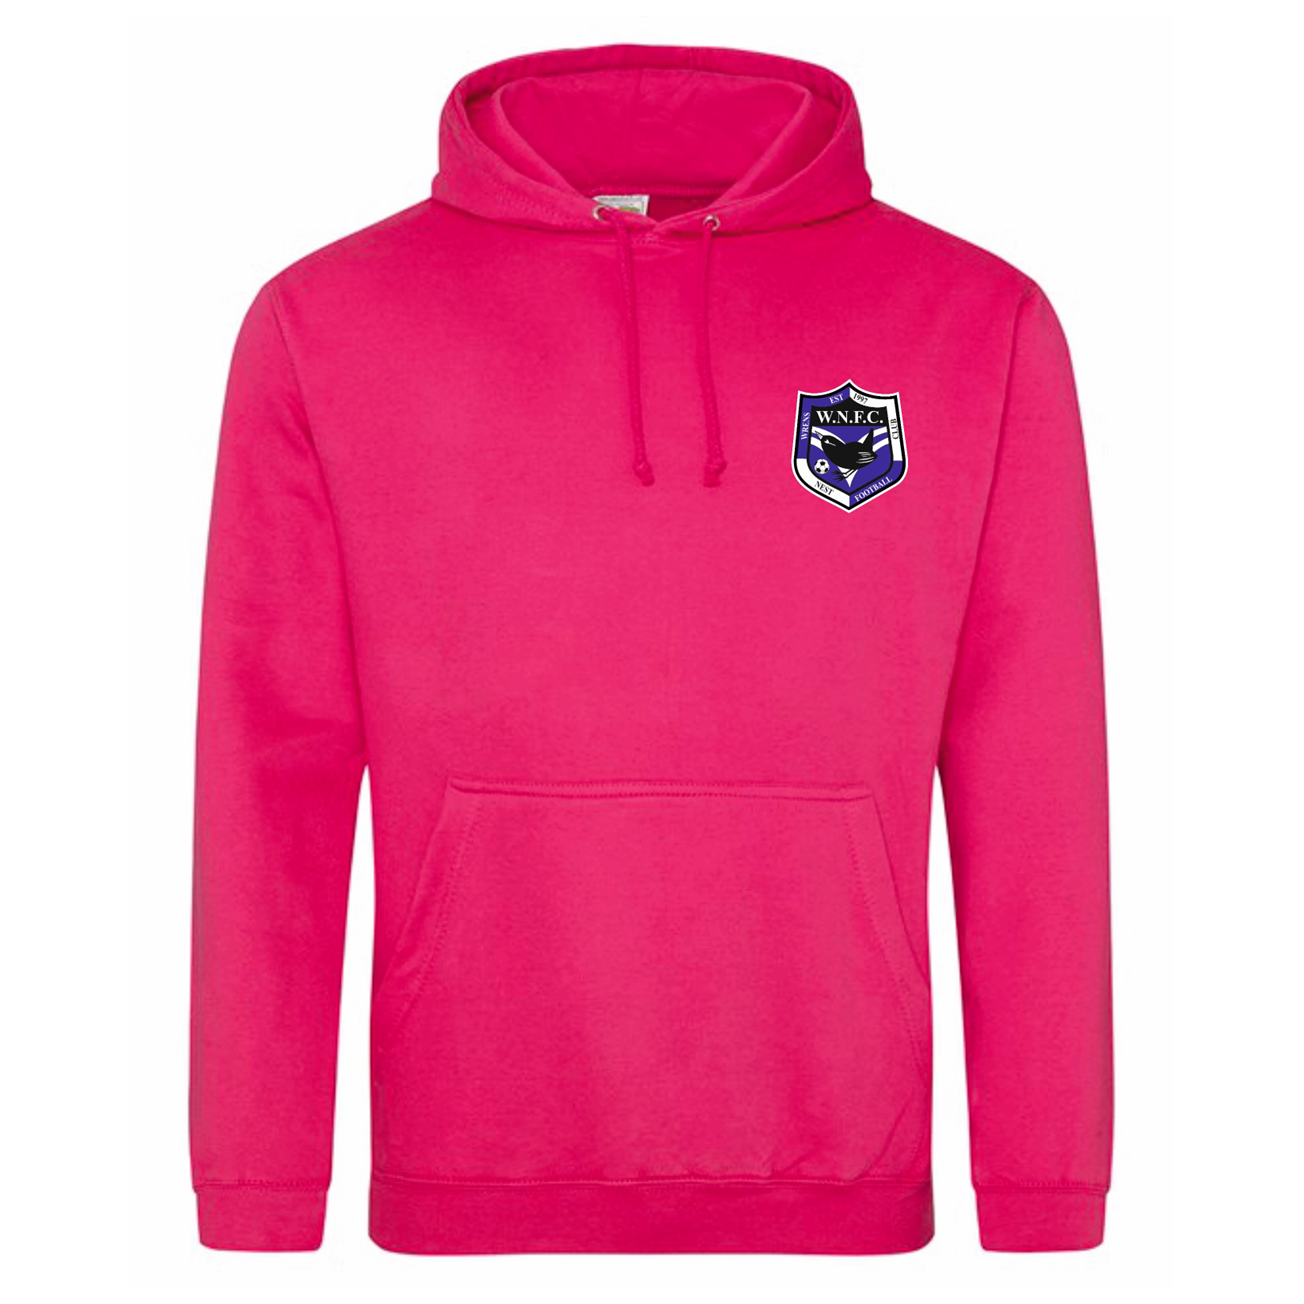 Wrens Nest FC - Supporters Hoodie